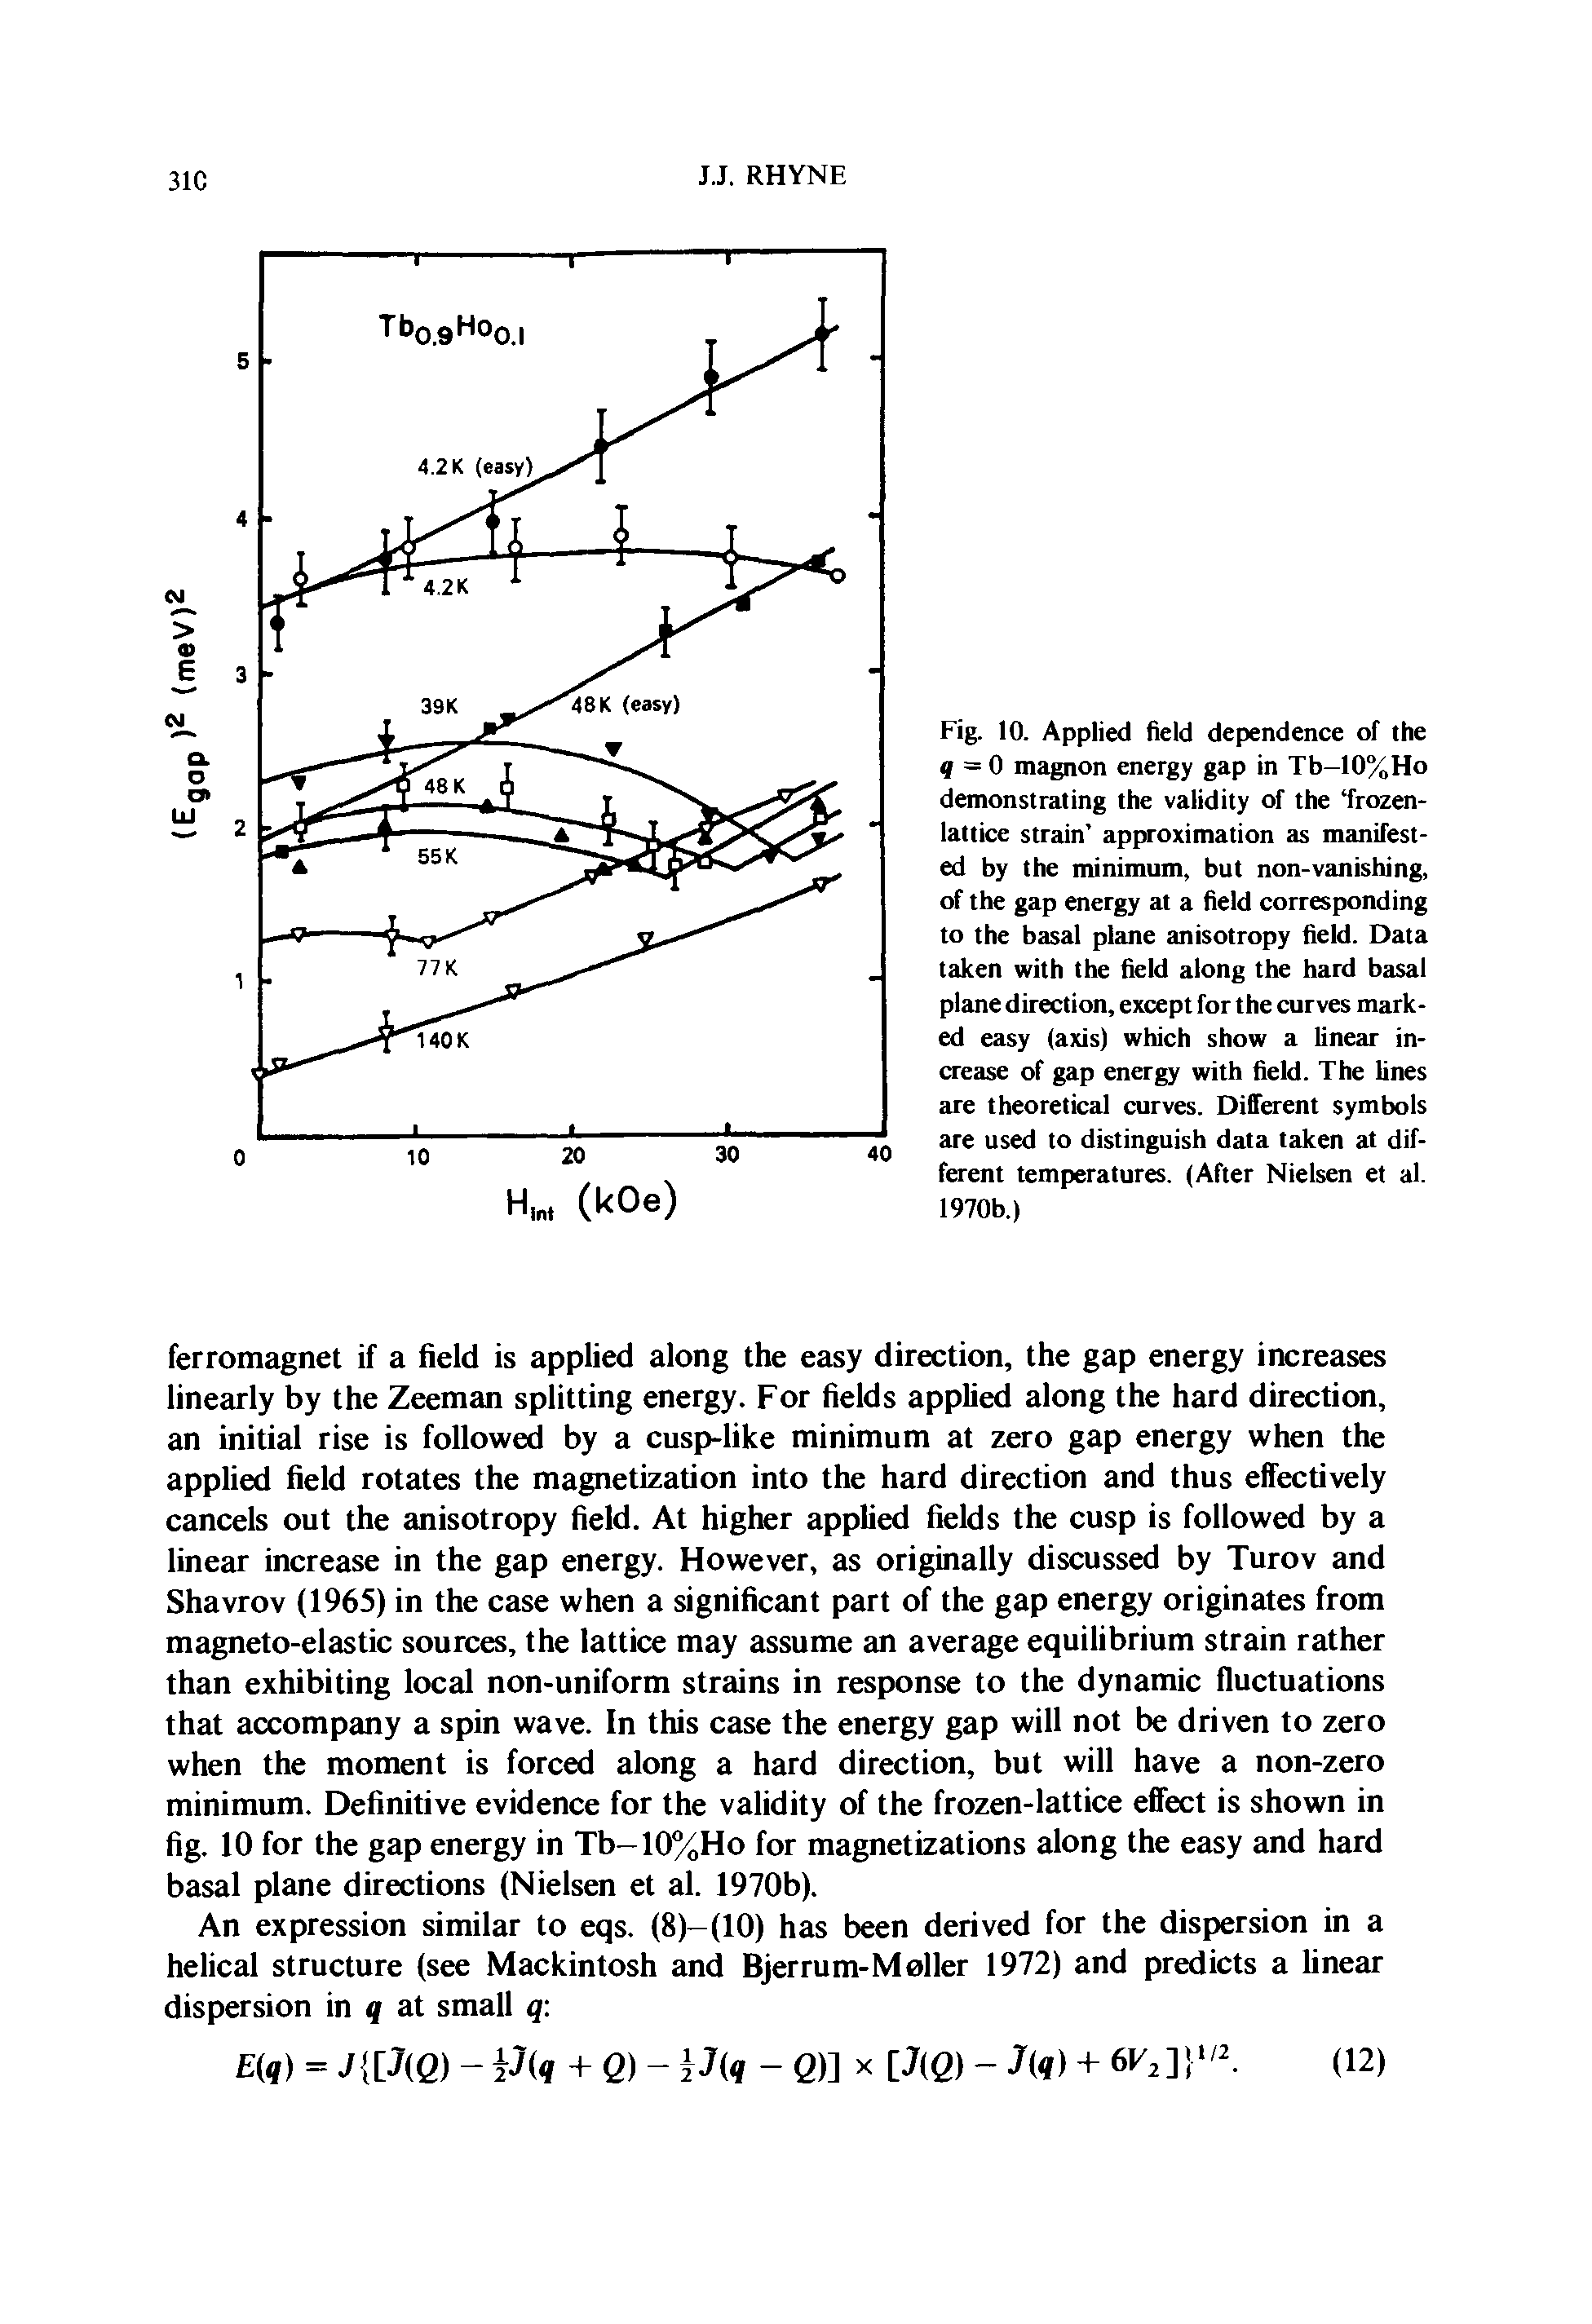 Fig. 10. Applied field dependence of the = 0 magnon energy gap in Tb—10%Ho demonstrating the validity of the frozen-lattice strain approximation as manifested by the minimum, but non-vanishing, of the gap energy at a held corresponding to the basal plane anisotropy held. Data taken with the field along the hard basal plane direction, except for the curves marked easy (axis) which show a linear increase of gap energy with field. The lines are theoretical curves. Different symbols are used to distinguish data taken at different temperatures. (After Nielsen et al. 1970b.)...